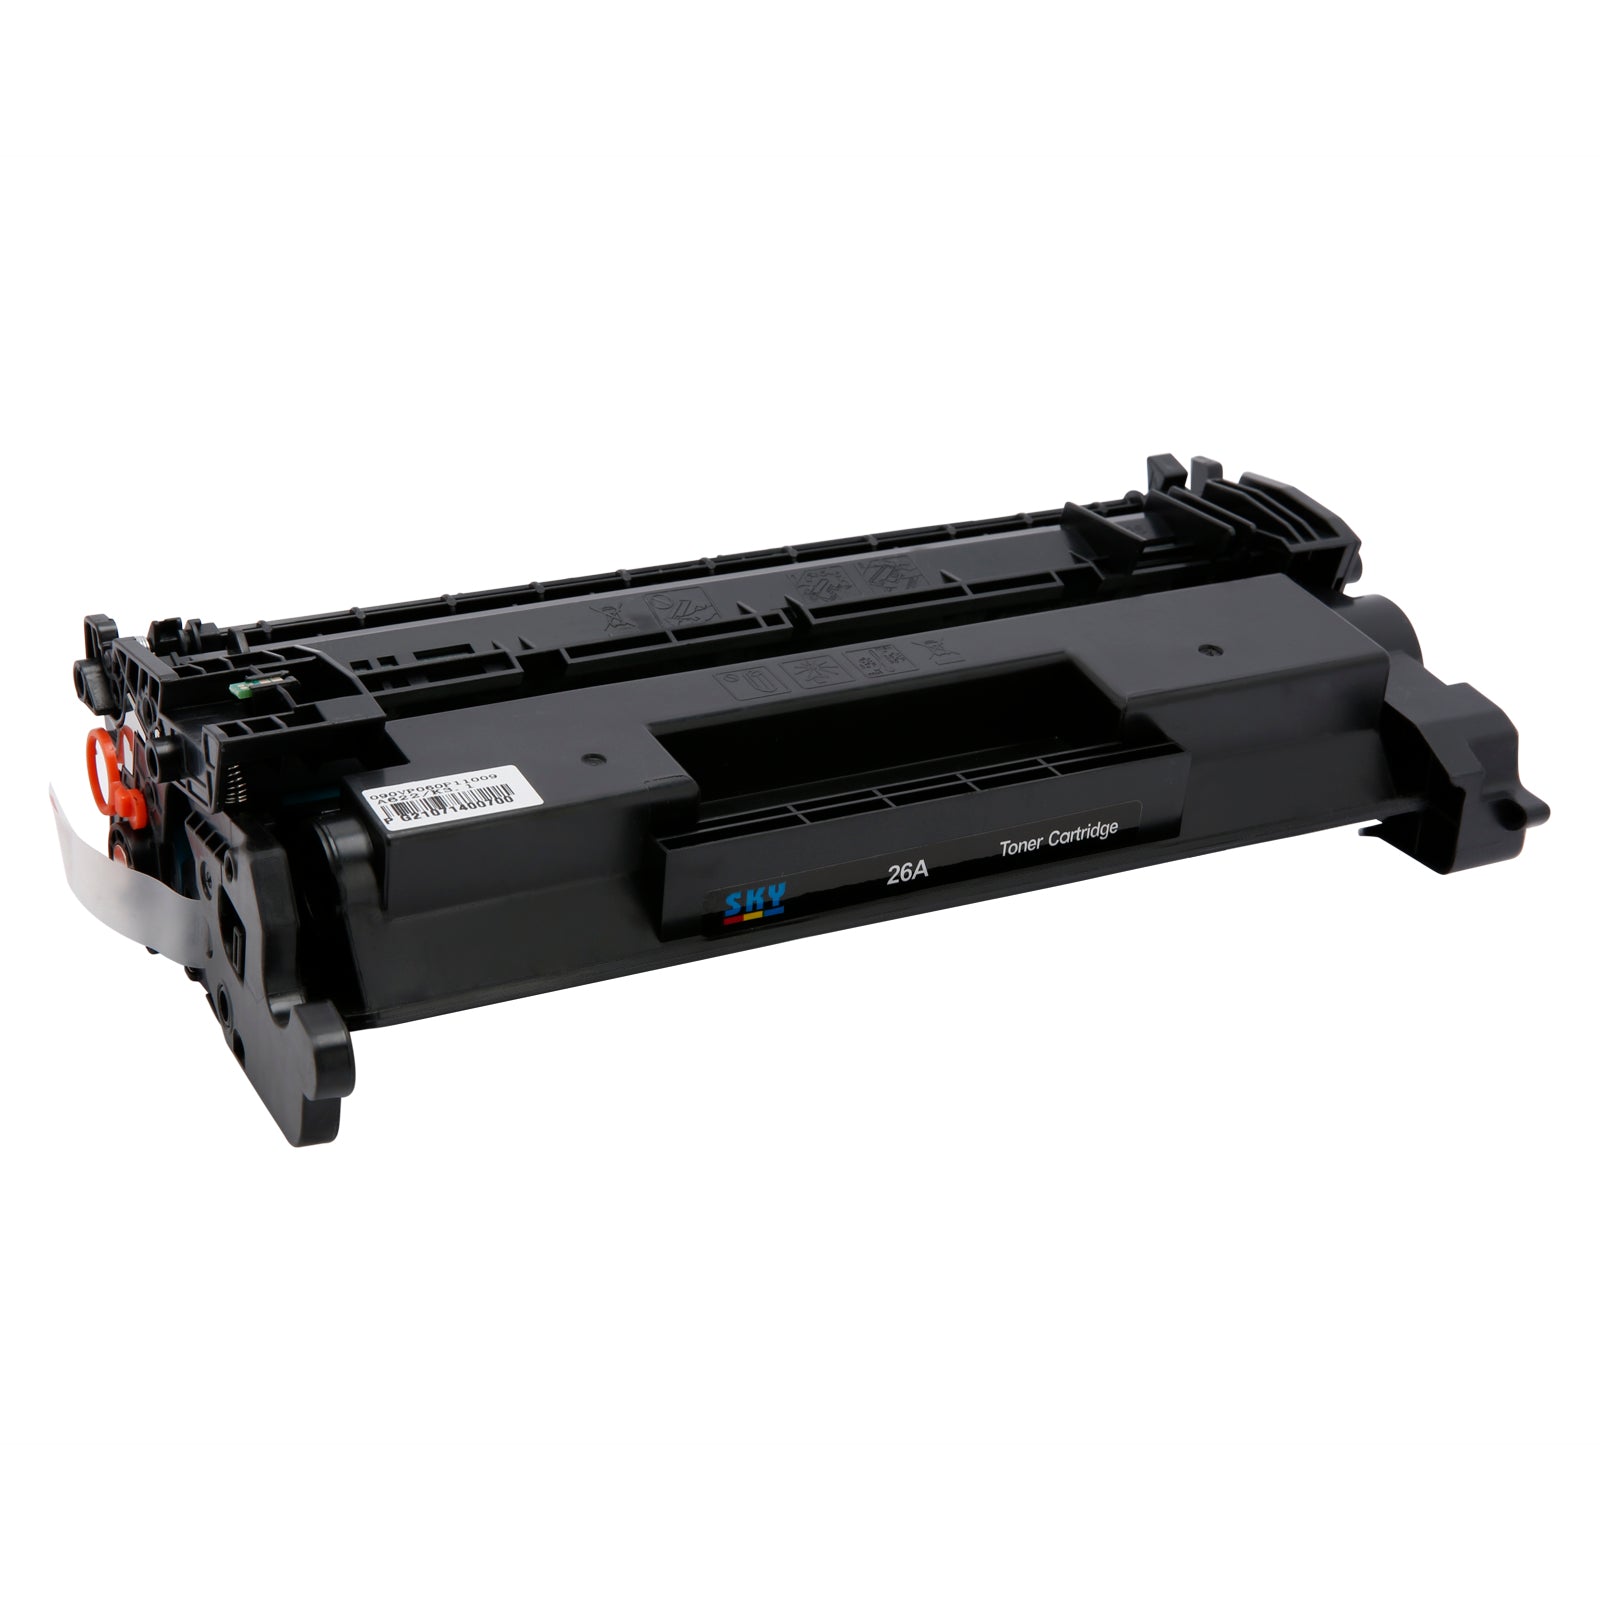 SKY 26A Toner Cartridge CF226A for Laserjet Pro M402 and M426 Printers